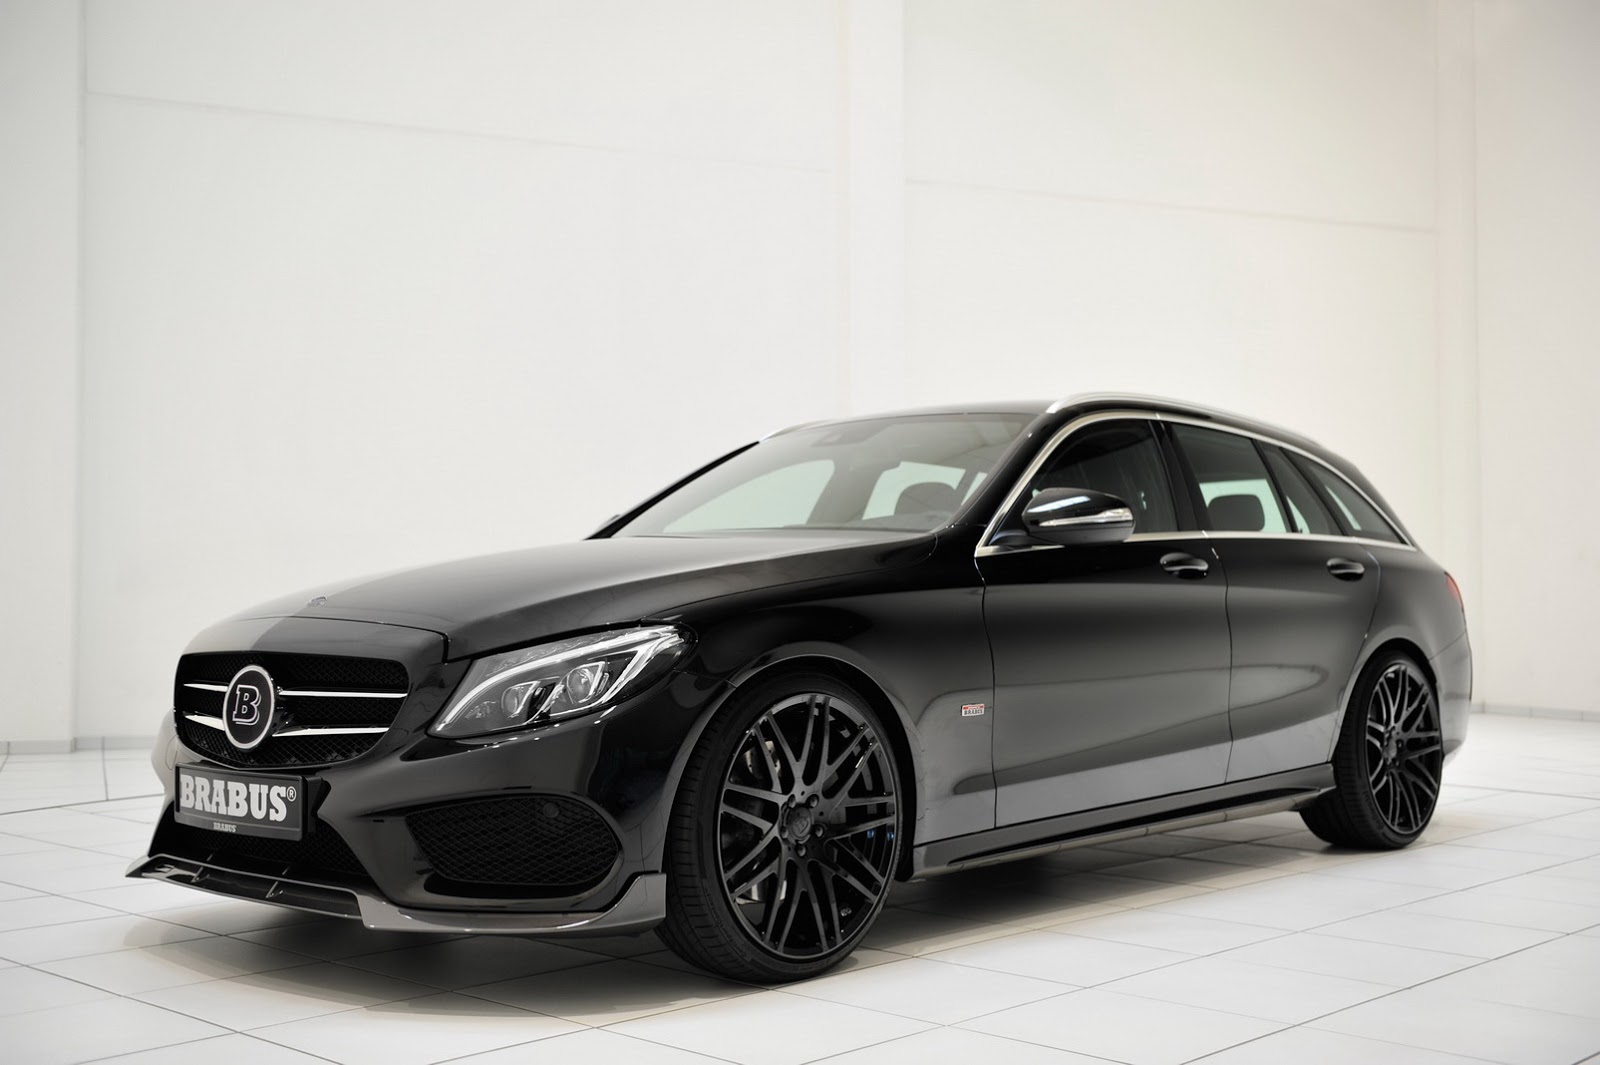 Brabus Turns The Wick On New Mercedes-Benz C-Class Wagon